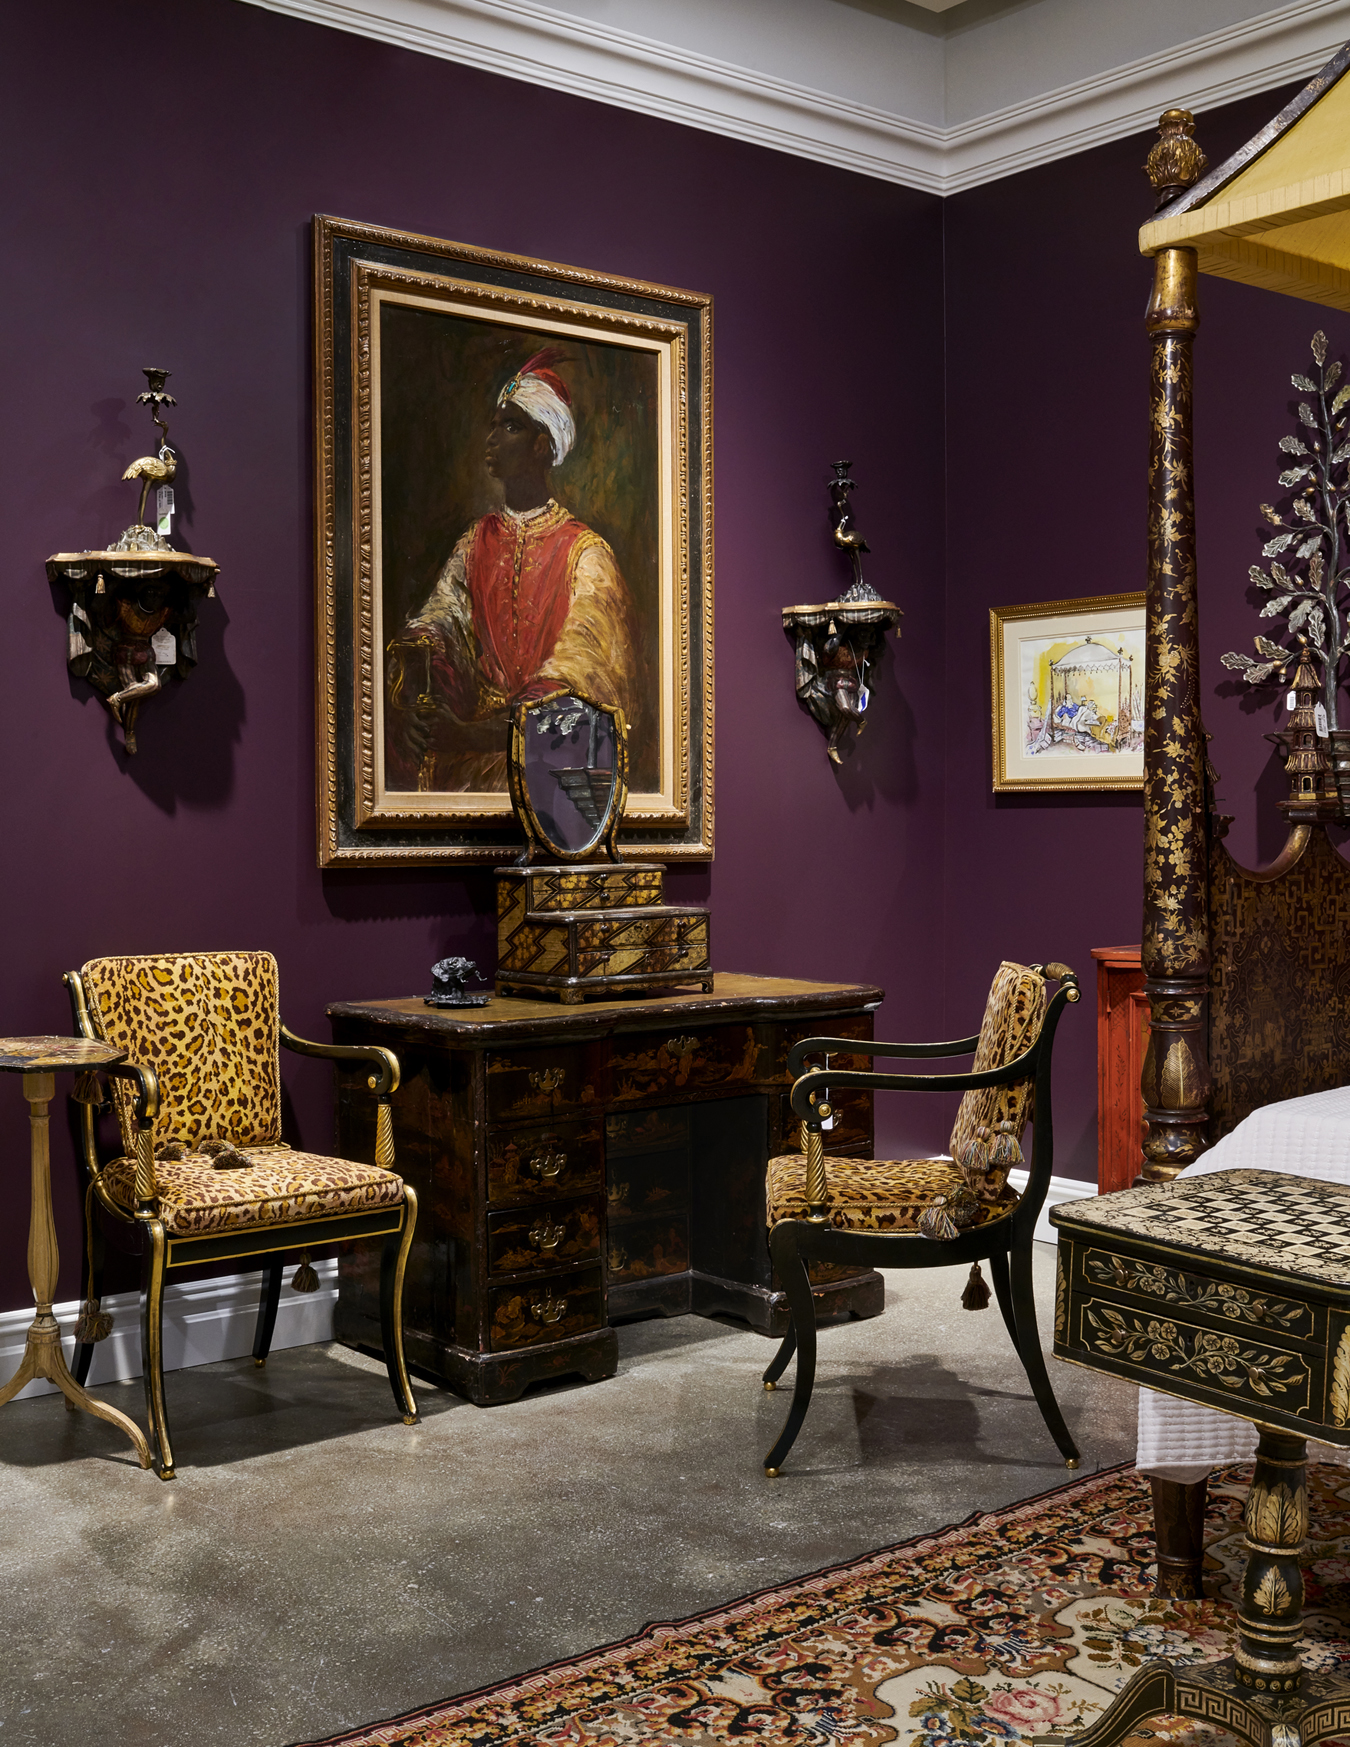 Rich colors and exotic subjects were hallmarks of Mario Buatta’s “maximalist” style as reflected in the Sotheby’s exhibit designed by Rush Jenkins of Jackson Hole’s WRJ Design (photo by Gabby Jones).